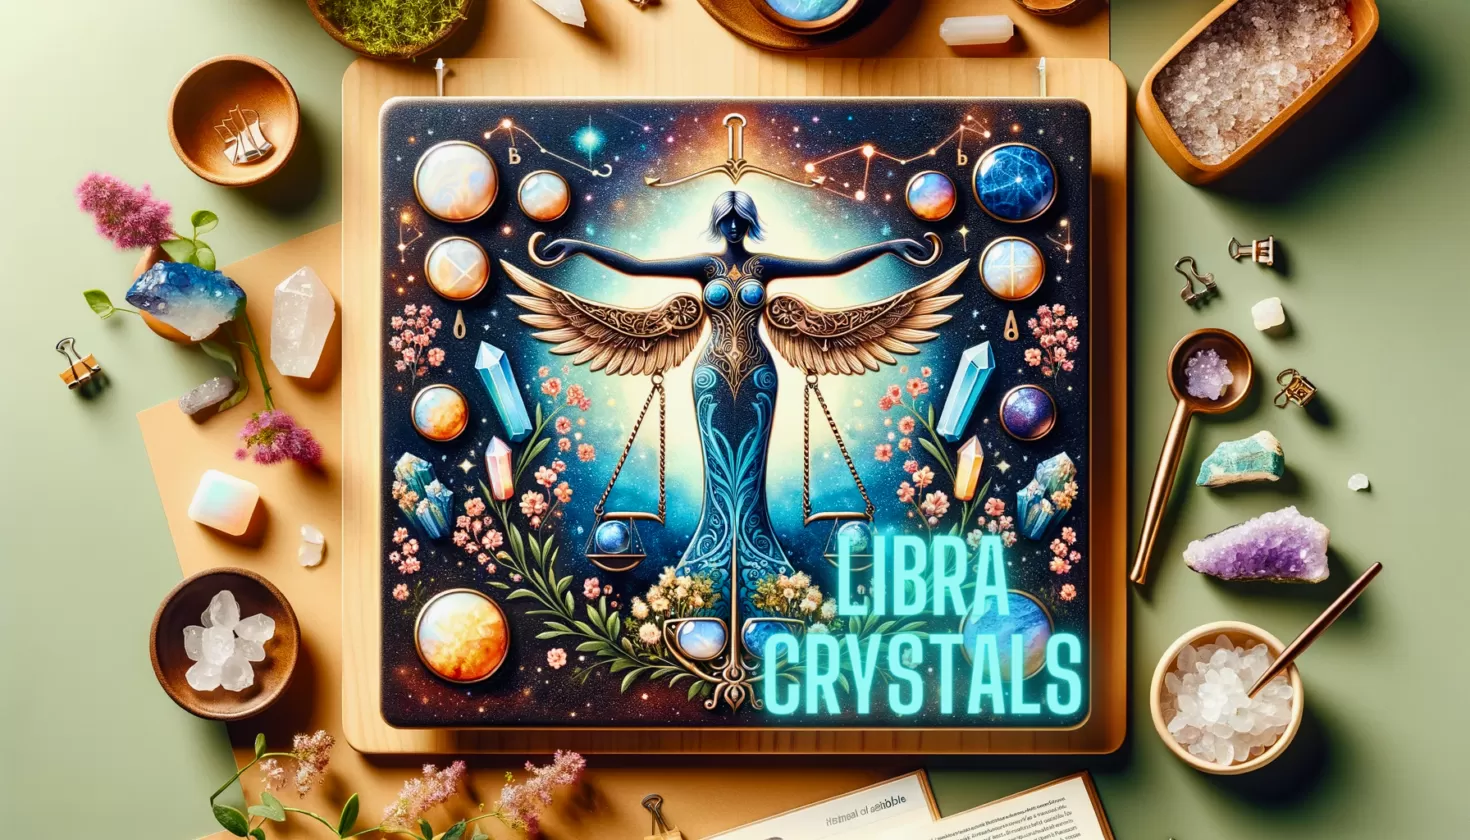 Collection of healing crystals for Libra including opal and sapphire, with symbolic scales and constellation imagery